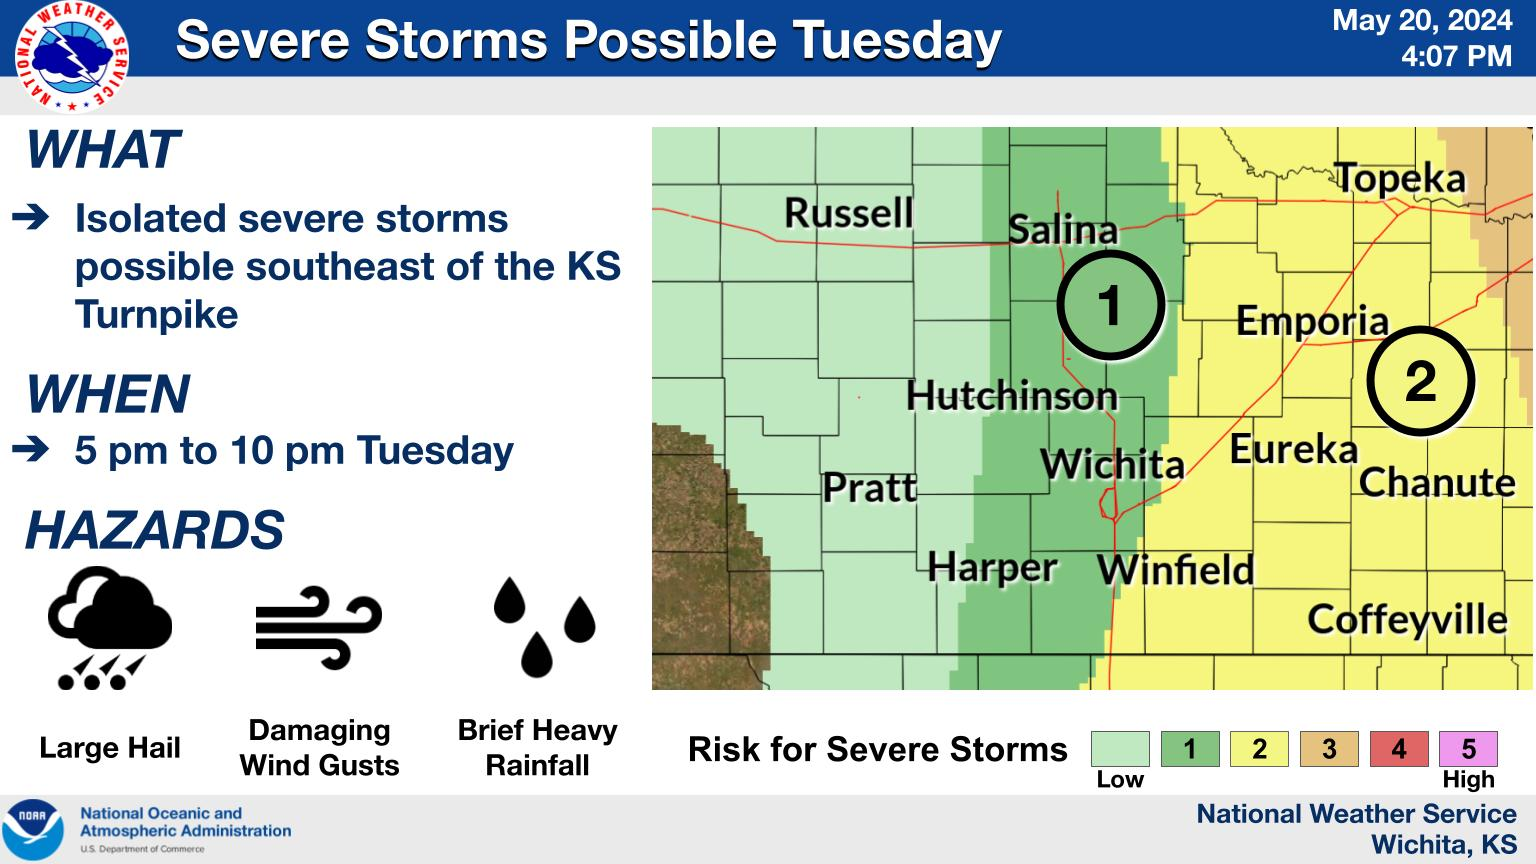 Severe Weather Alert for Wednesday: Possible Hail, Winds, and Tornadoes